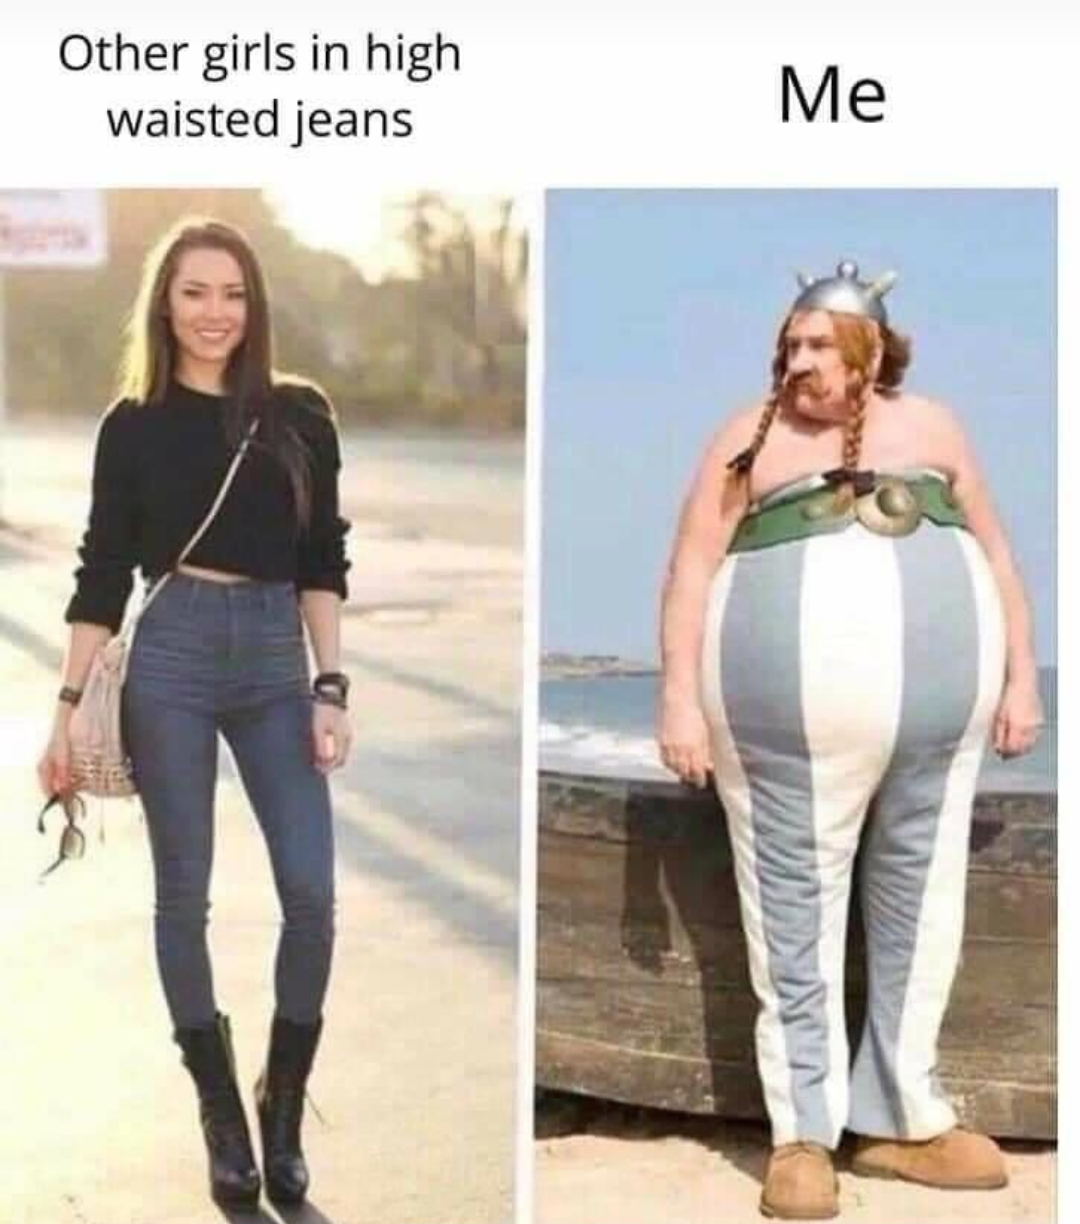 Other girls in high waisted jeans Me